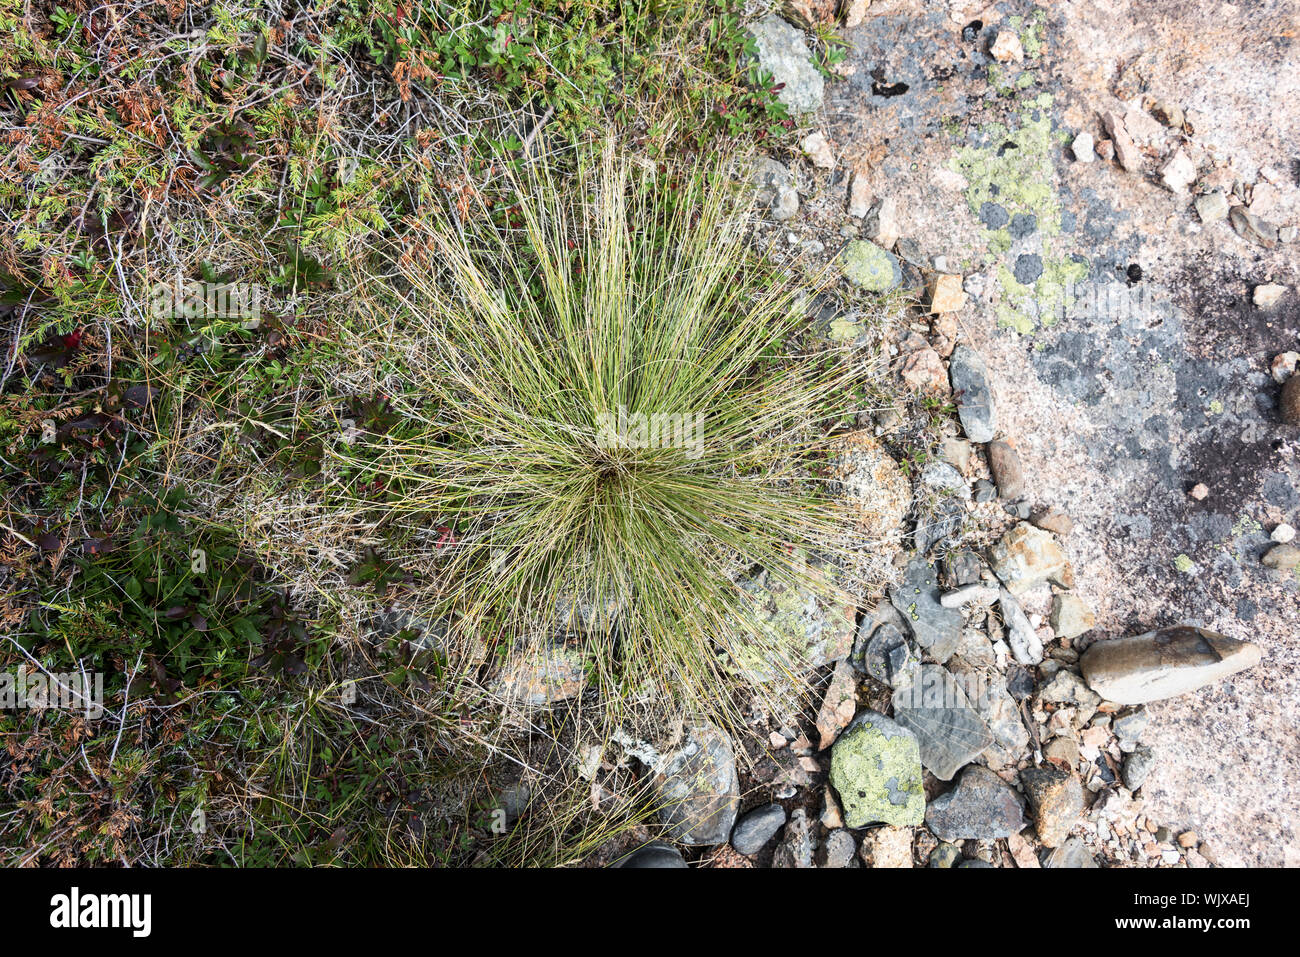 Tufted  Club-rush (Trichophorum cespitosum, also known as Deer's Hair Grass,  on the South Ridge of Cadillac Mountain, Acadia National Park, Maine. Stock Photo